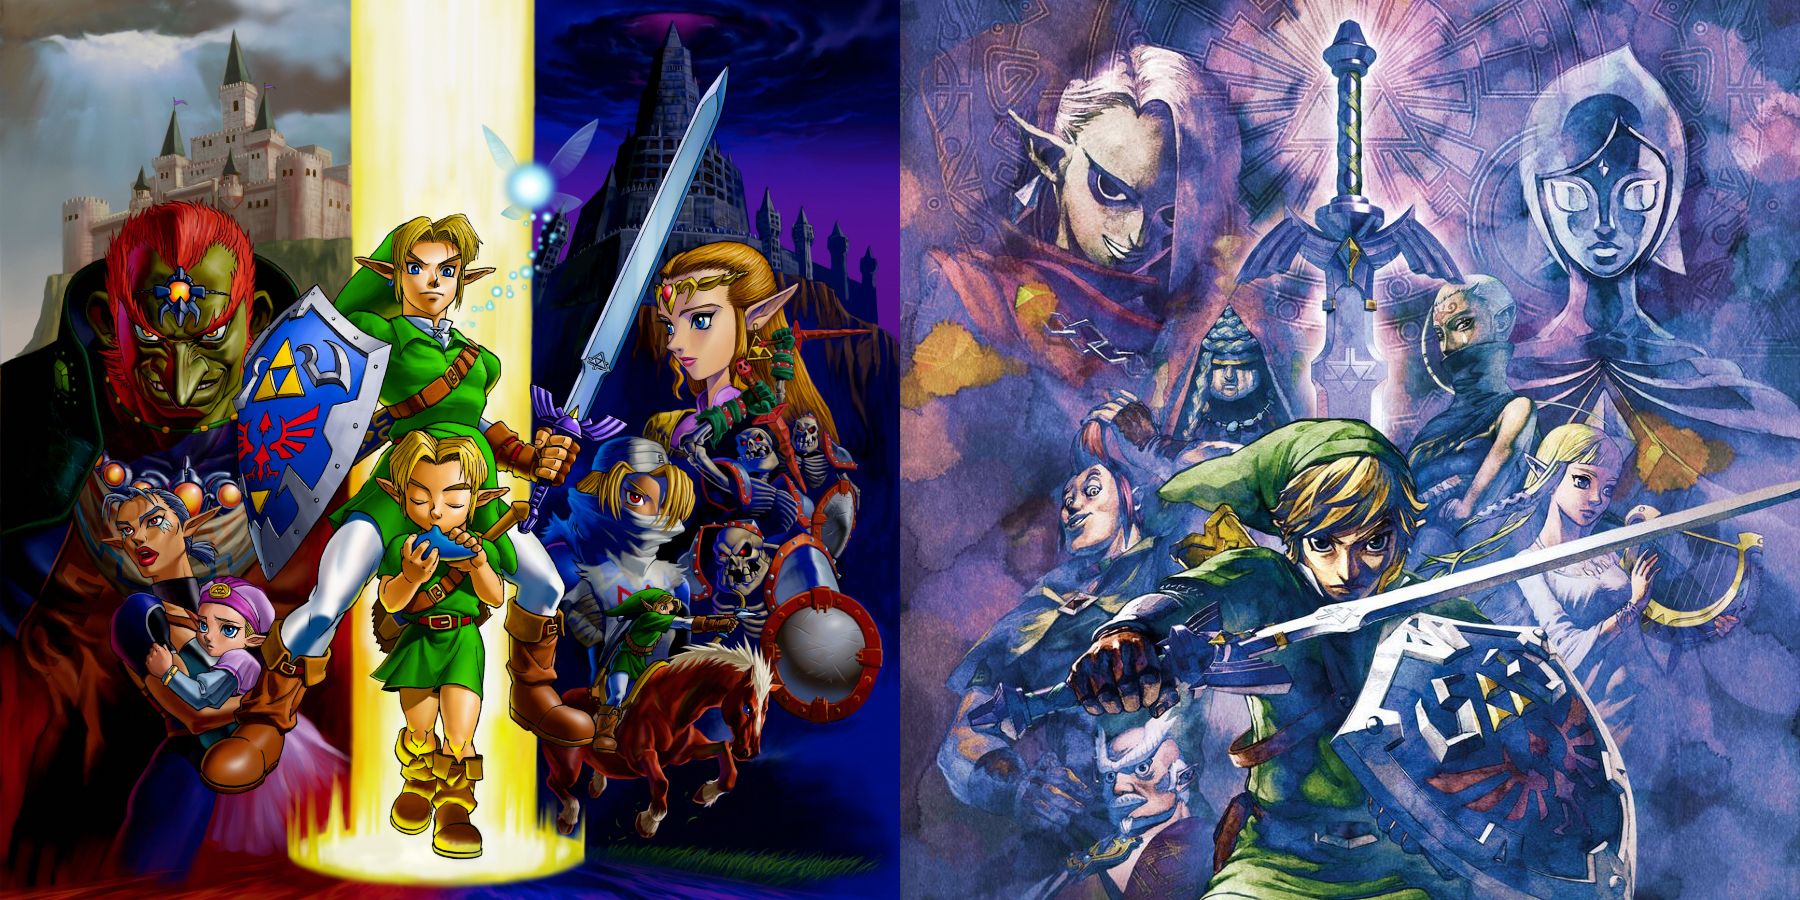 Skyward Sword replaced Ocarina of Time at the beginning of the Zelda timeline